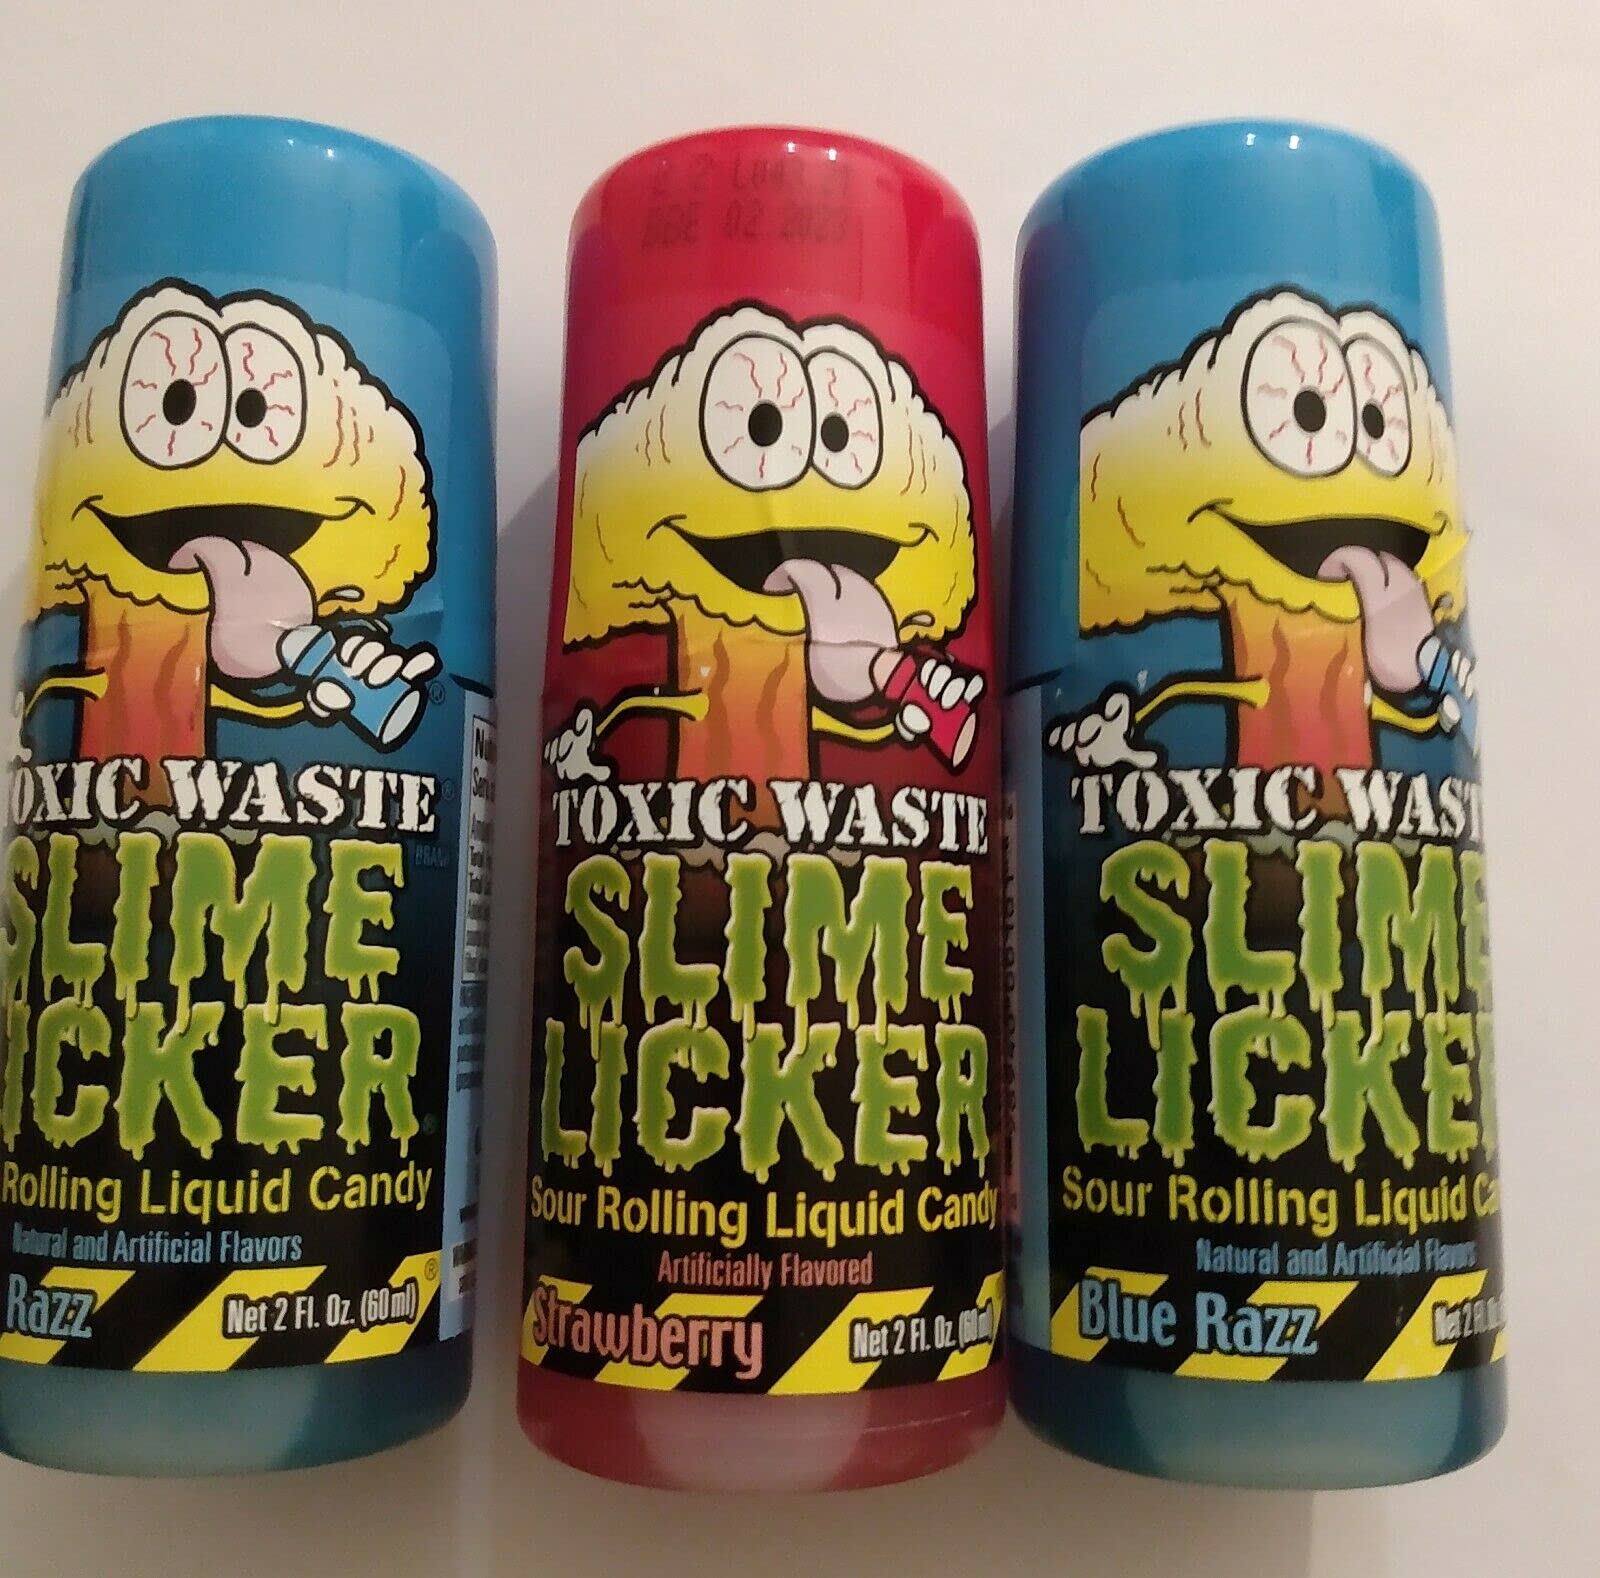 Slime Licker Bundle of Sour Rolling Liquid Candy One Strawberry and Two  Blue Razz Flavor 2oz